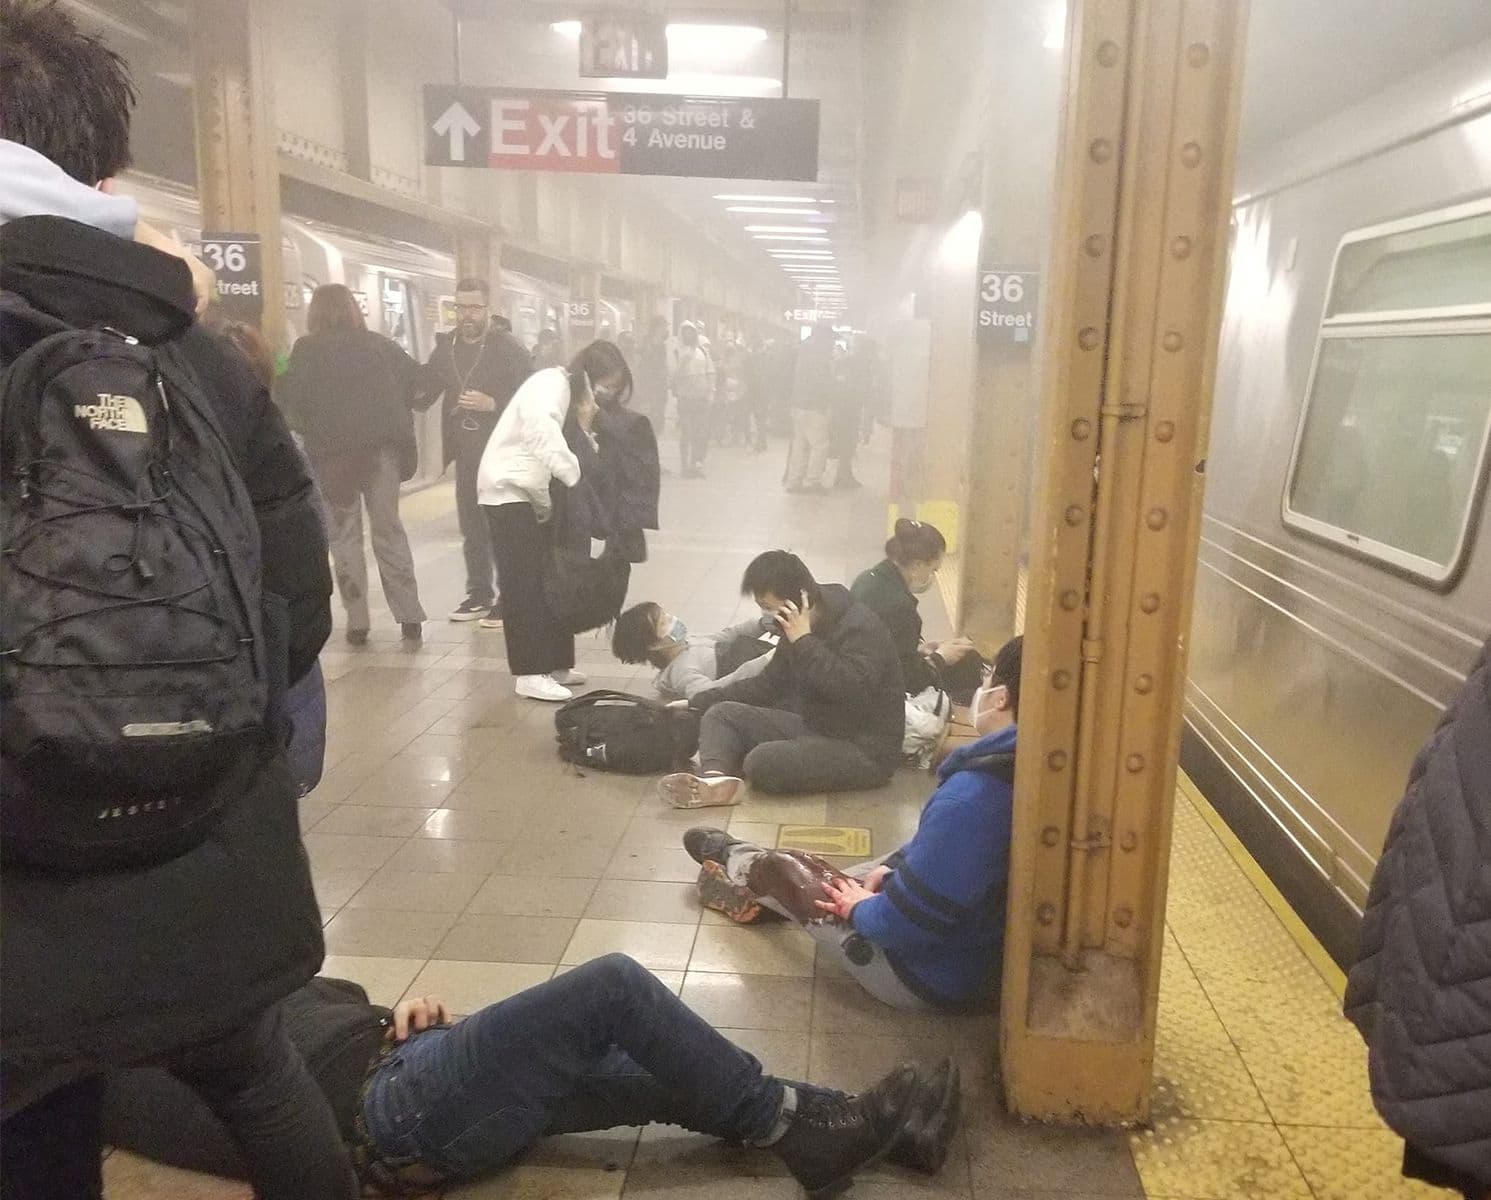 Wounded people lie at subway station in NYC